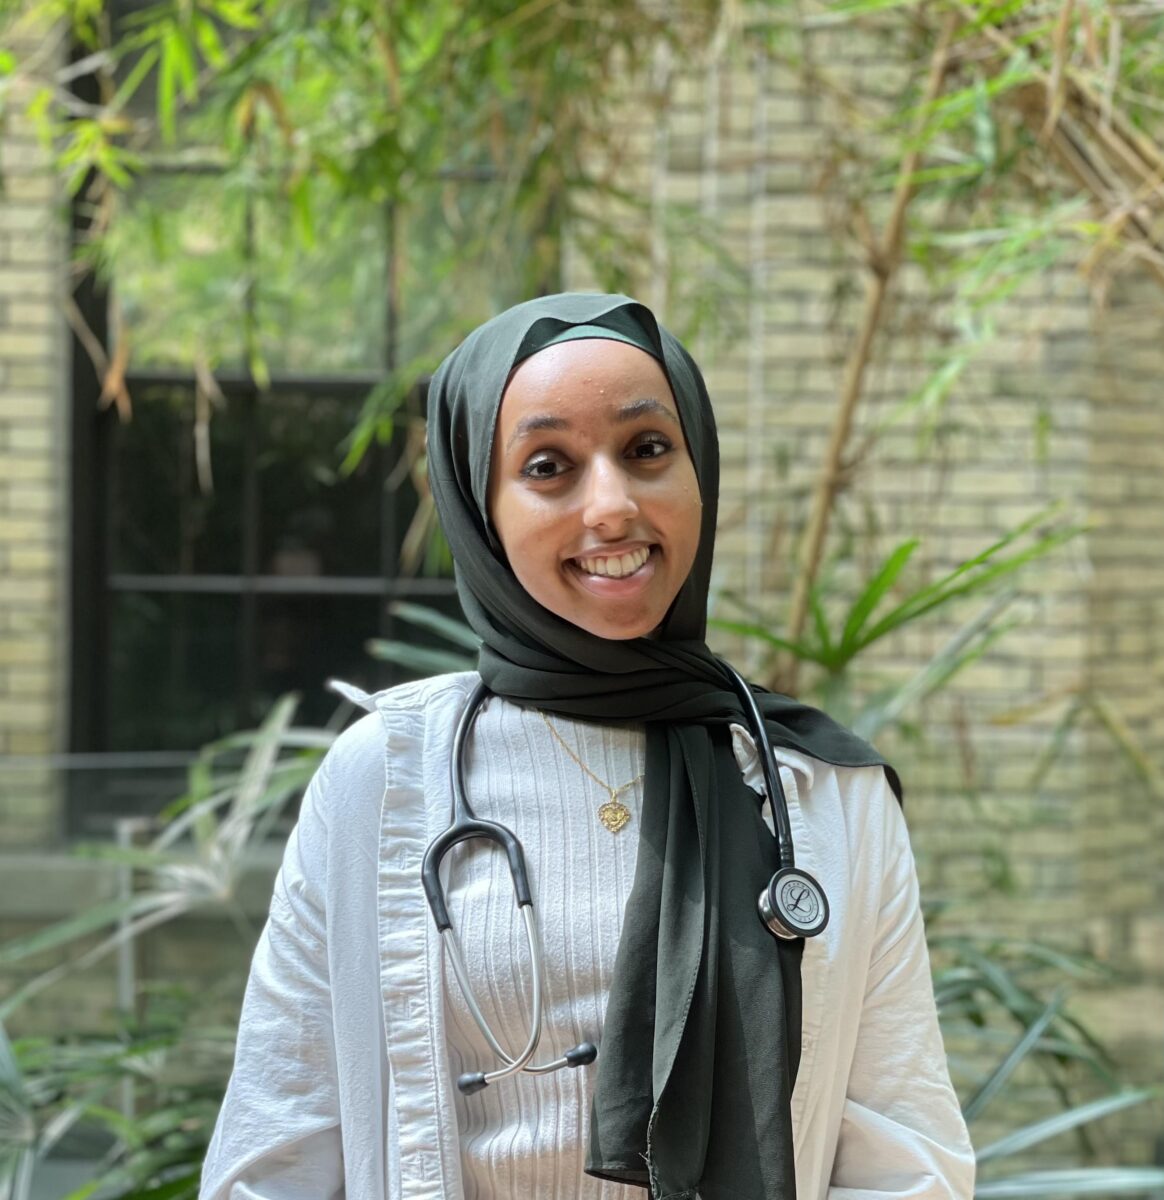 Image of woman in a hijab and wearing a stethoscope. Greenery and brick wall in the background